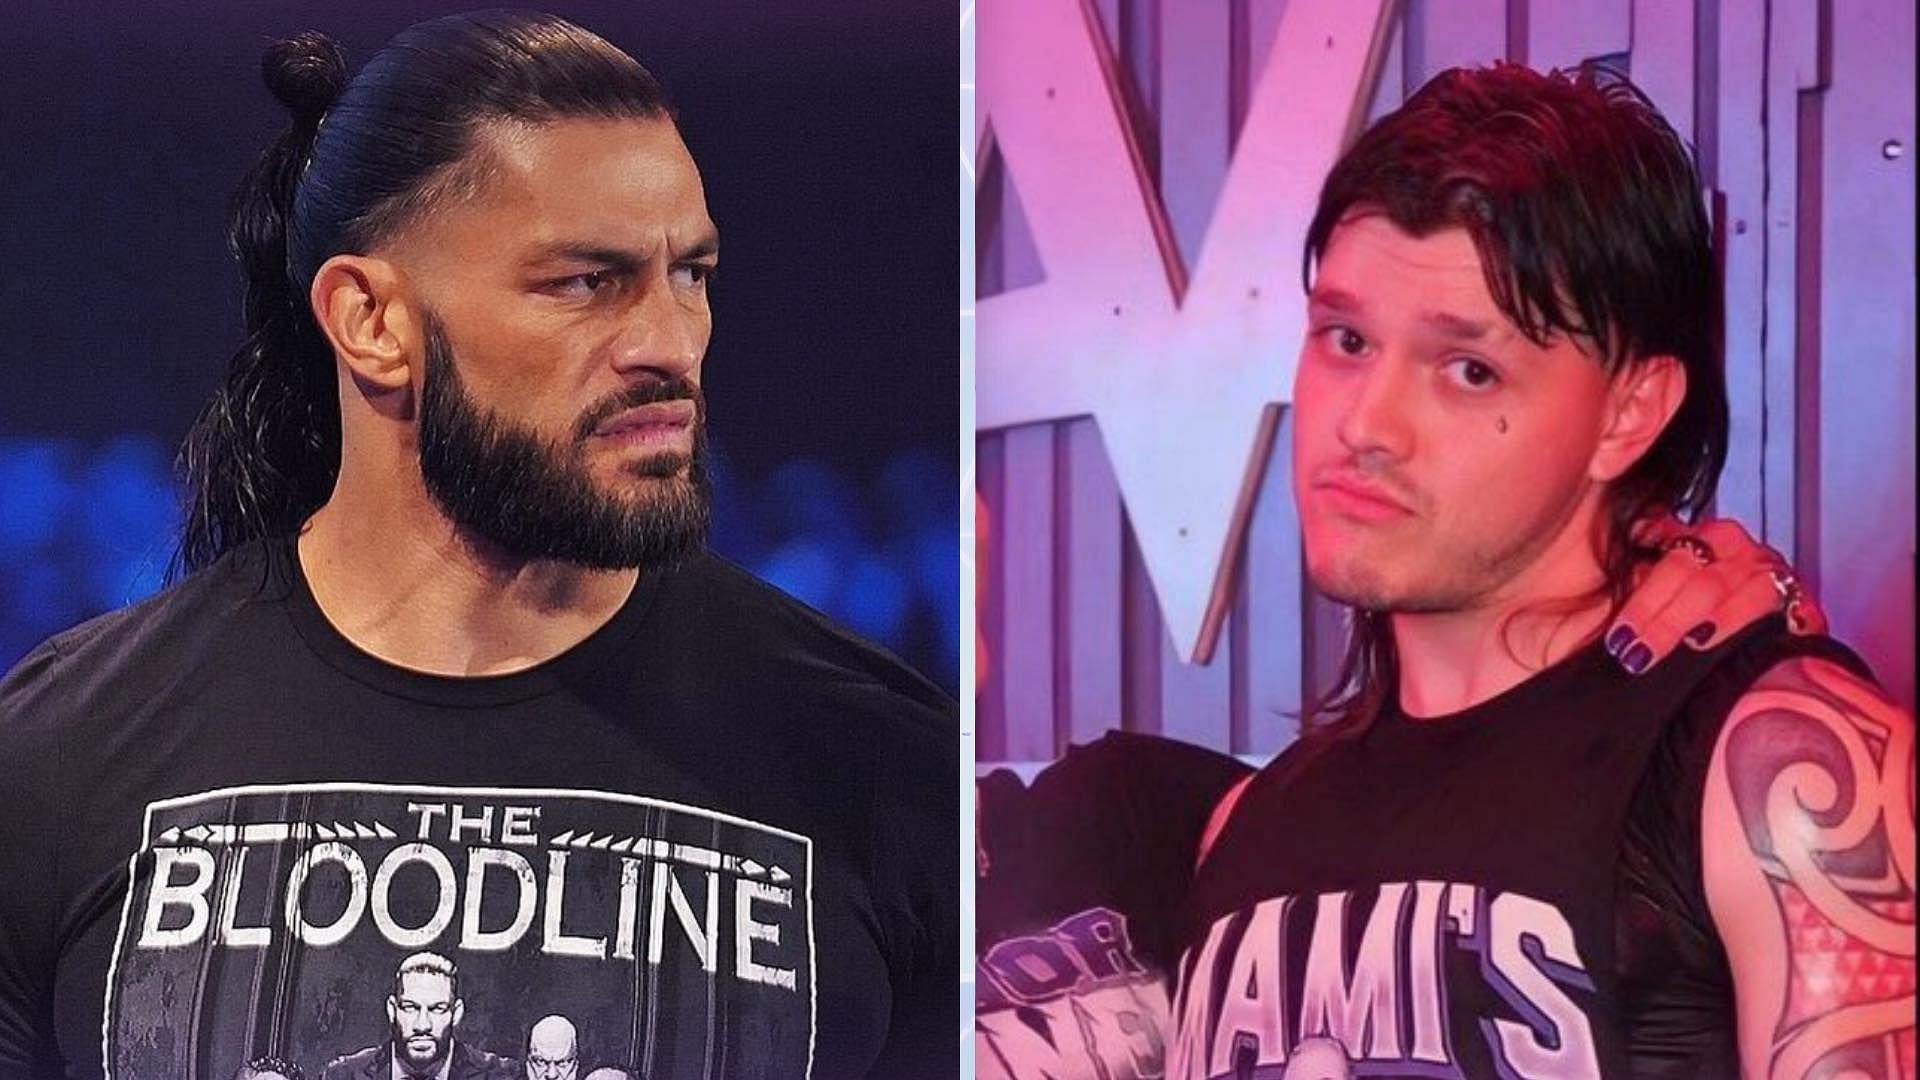 Dominik Mysterio and Roman Reigns are both important parts of recent WWE shows